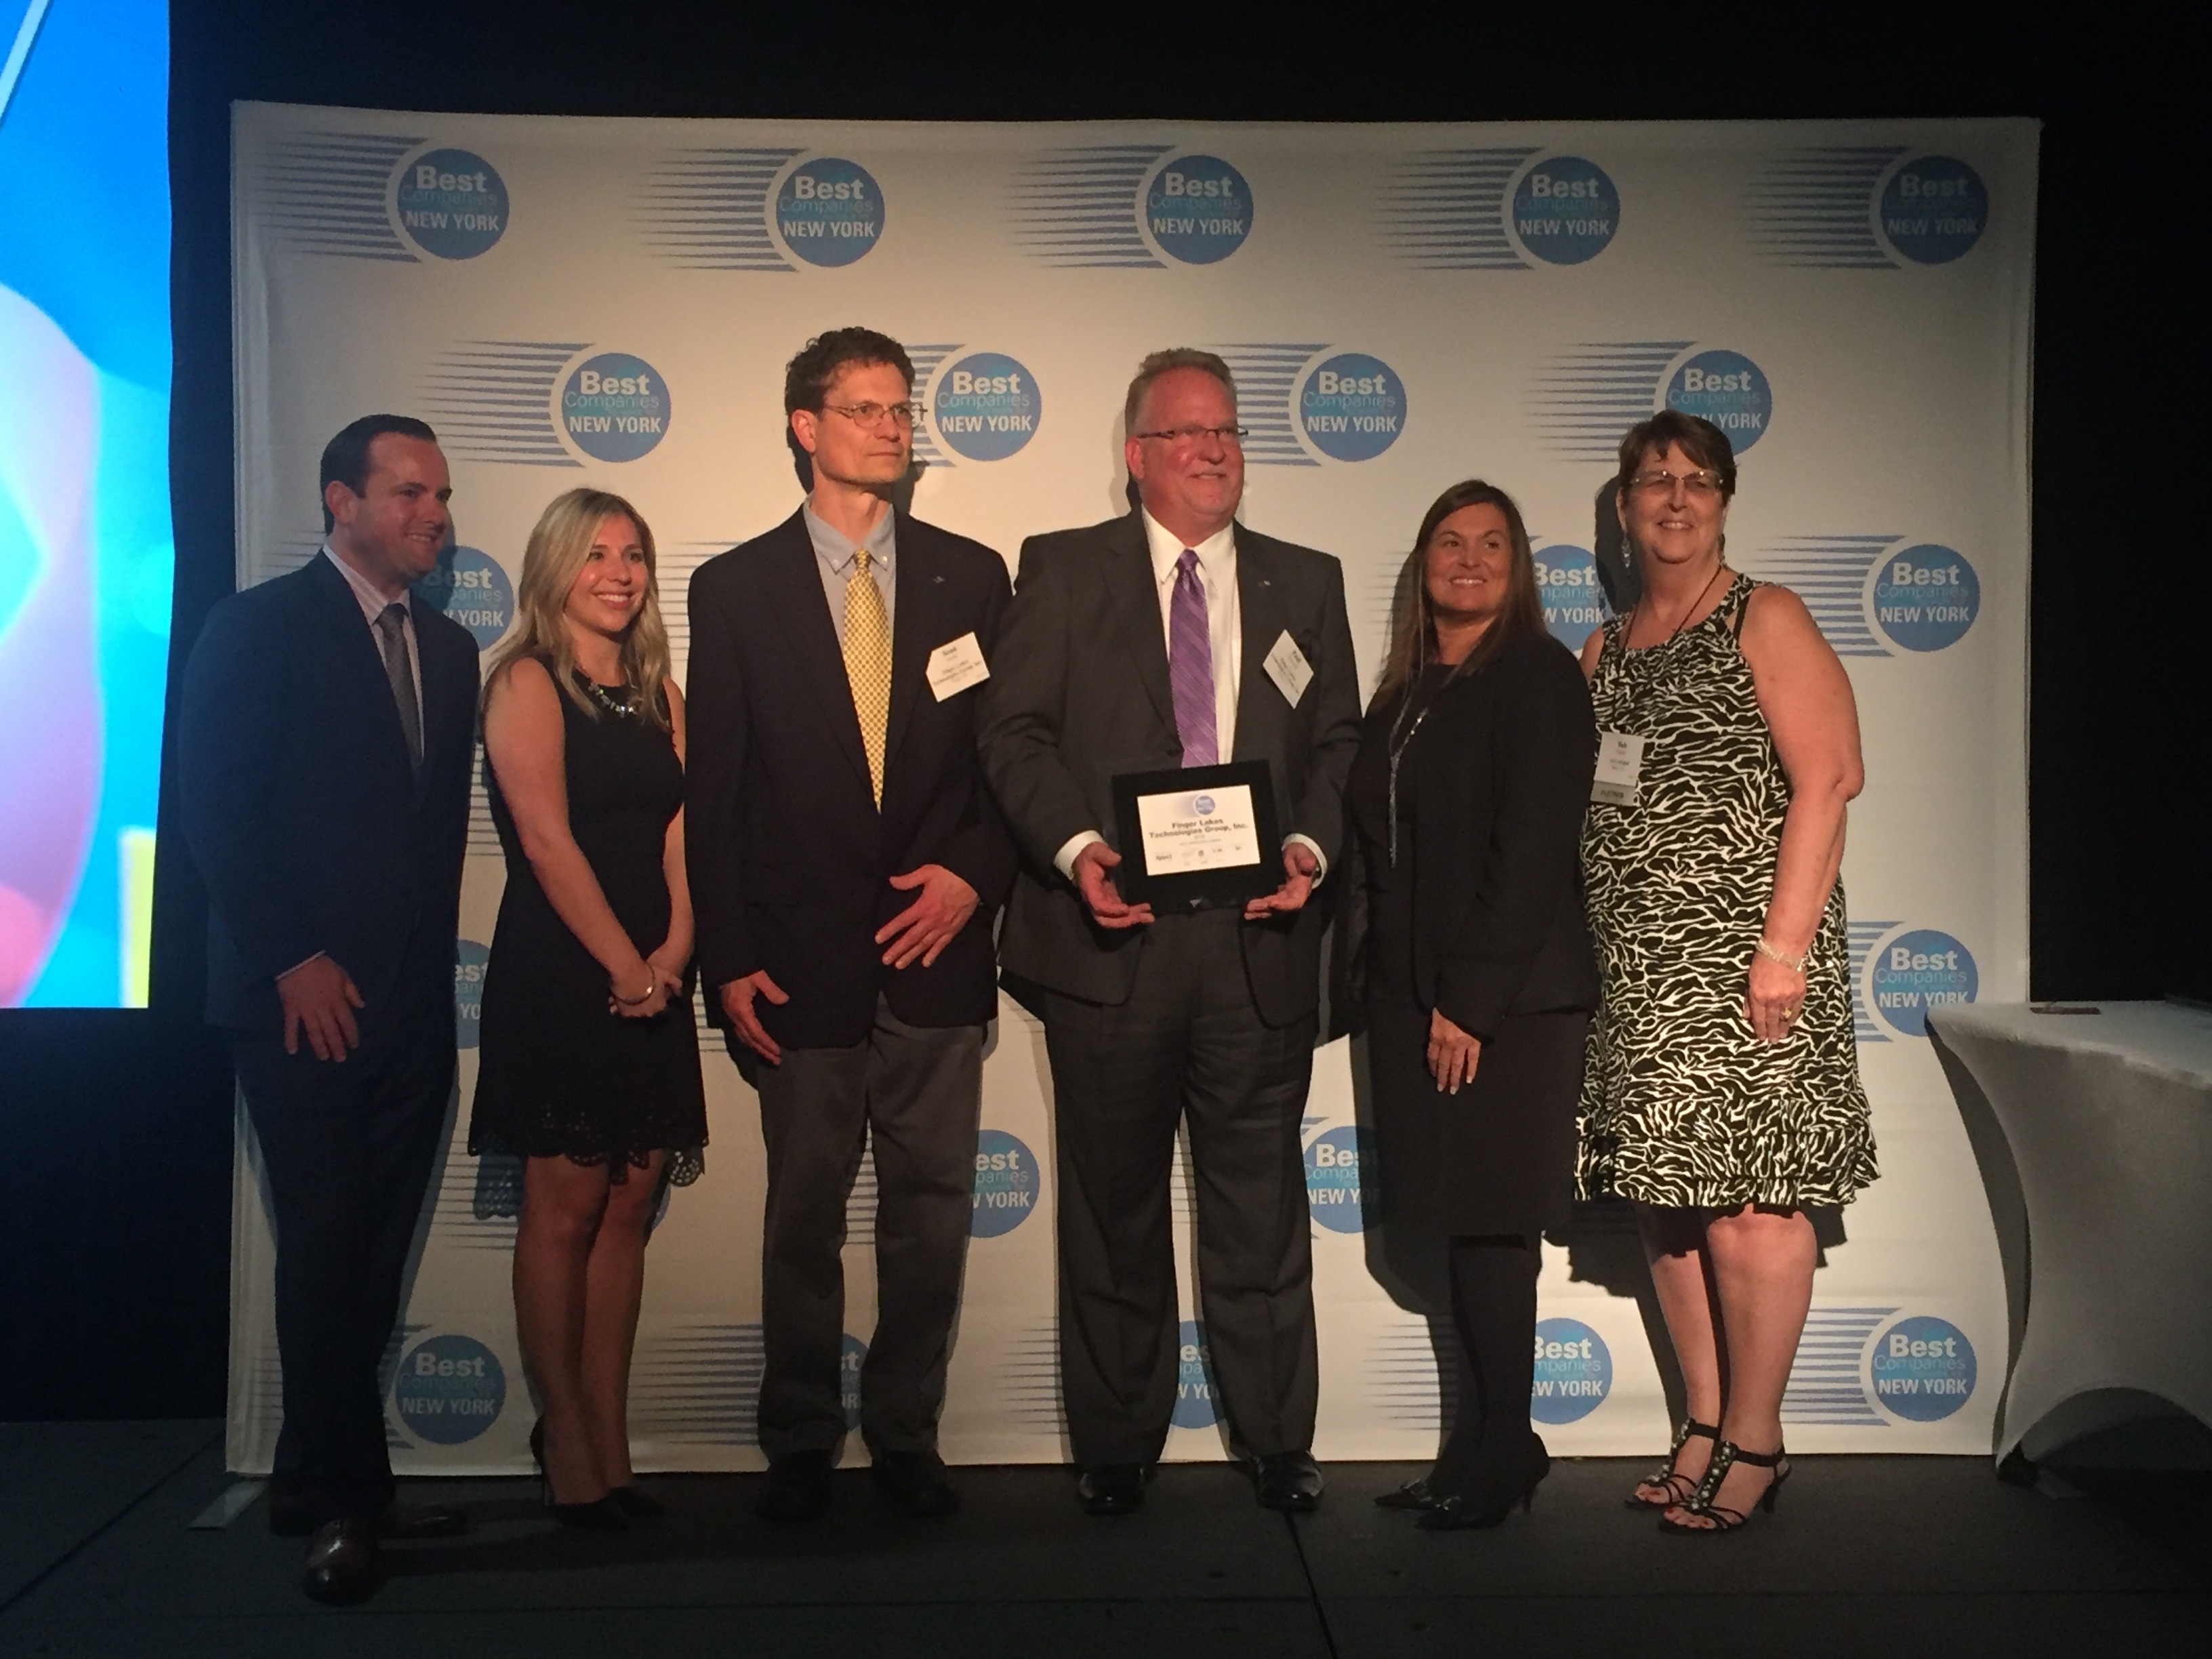 Paul H. Griswold, President and CEO accepting the #18 ranking for Best Place to work in NYS Award on behalf of Finger Lakes Technologies Group, Inc.